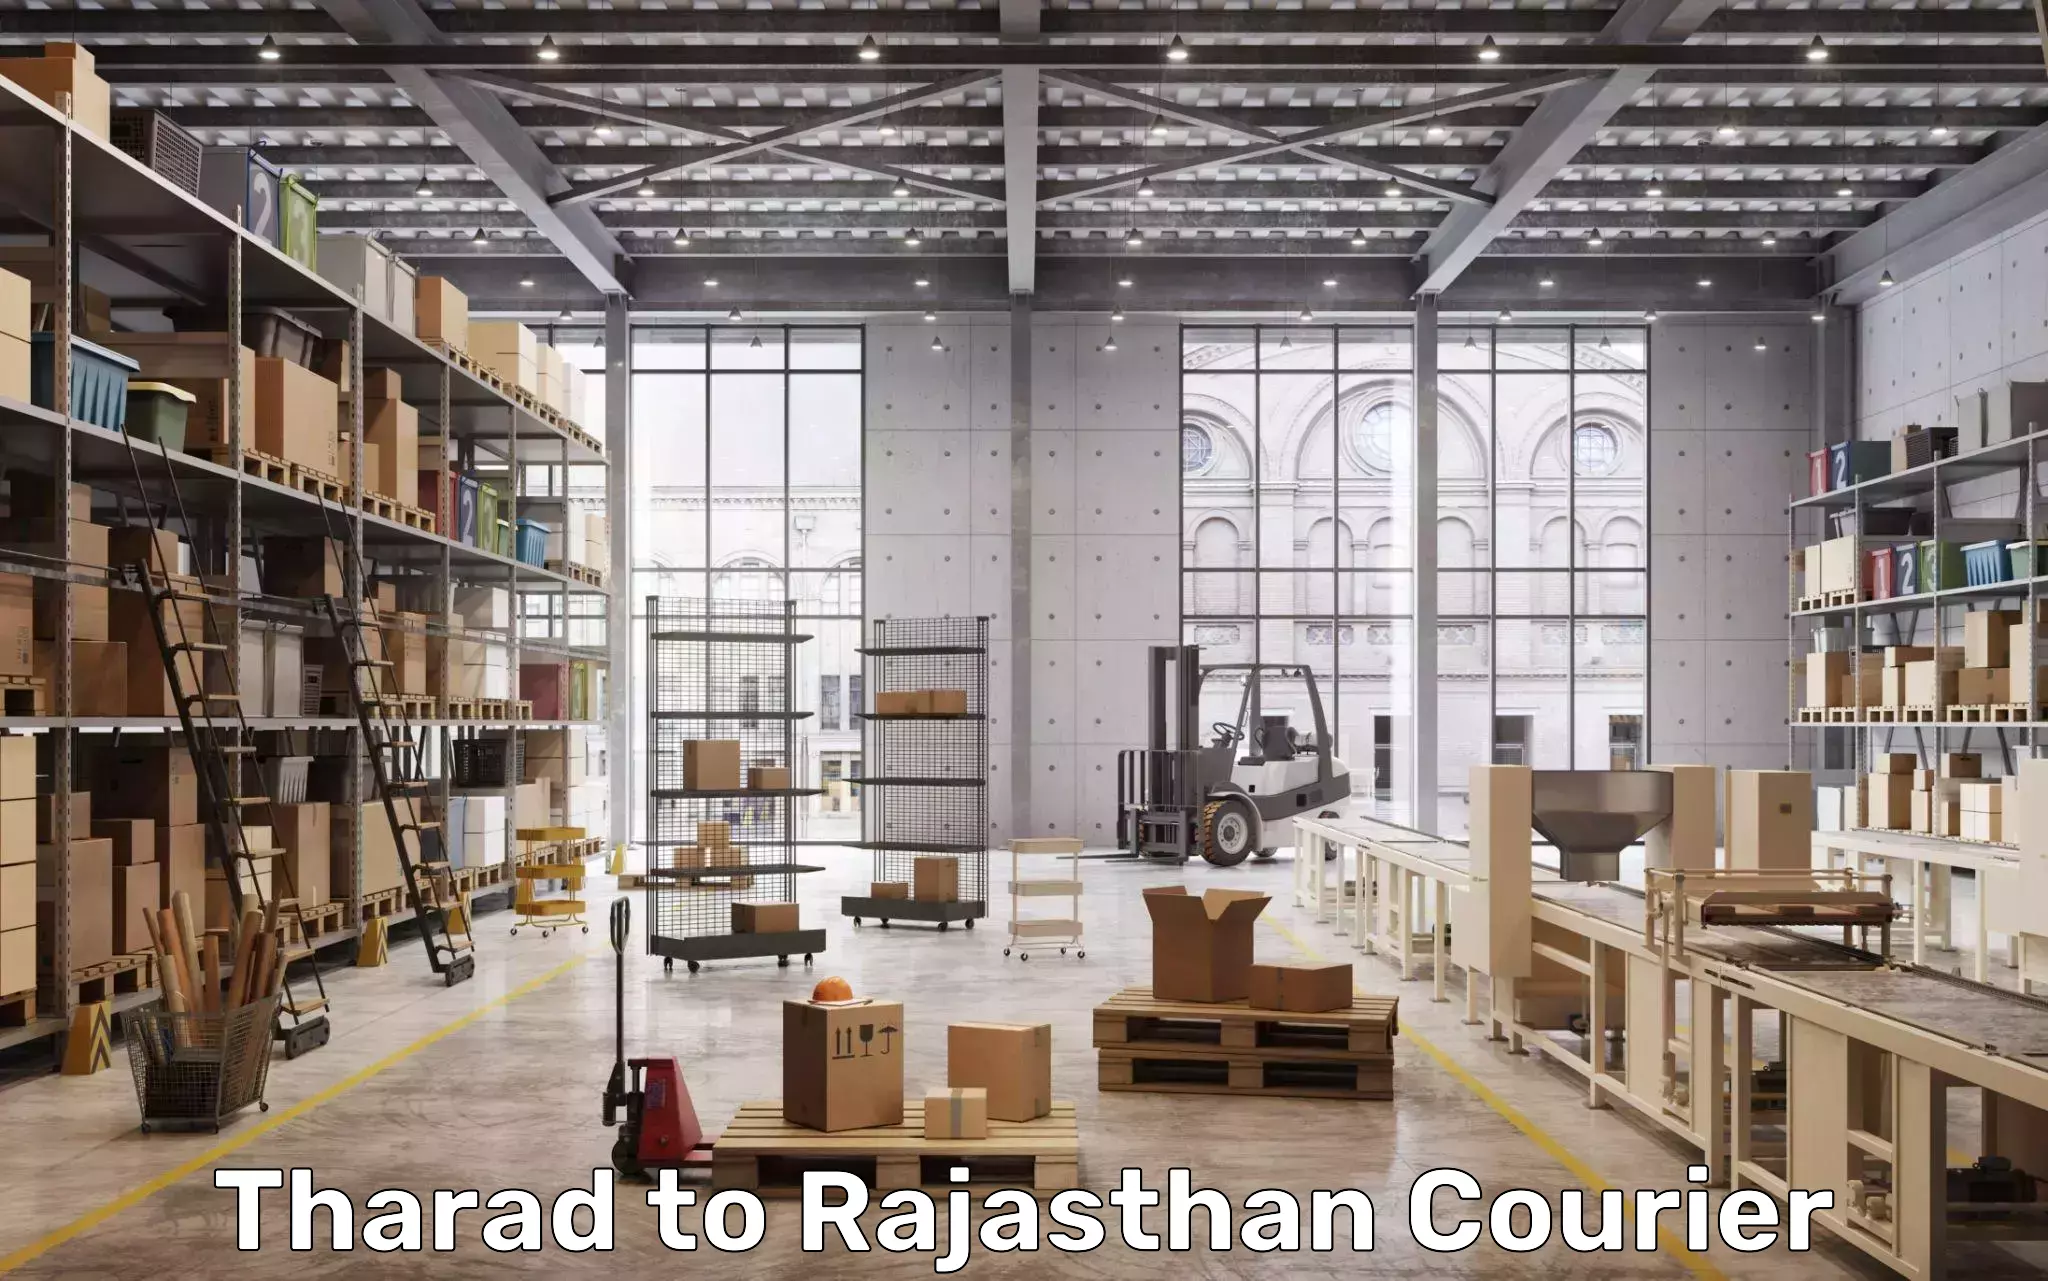 Luggage shipping specialists Tharad to Rajasthan